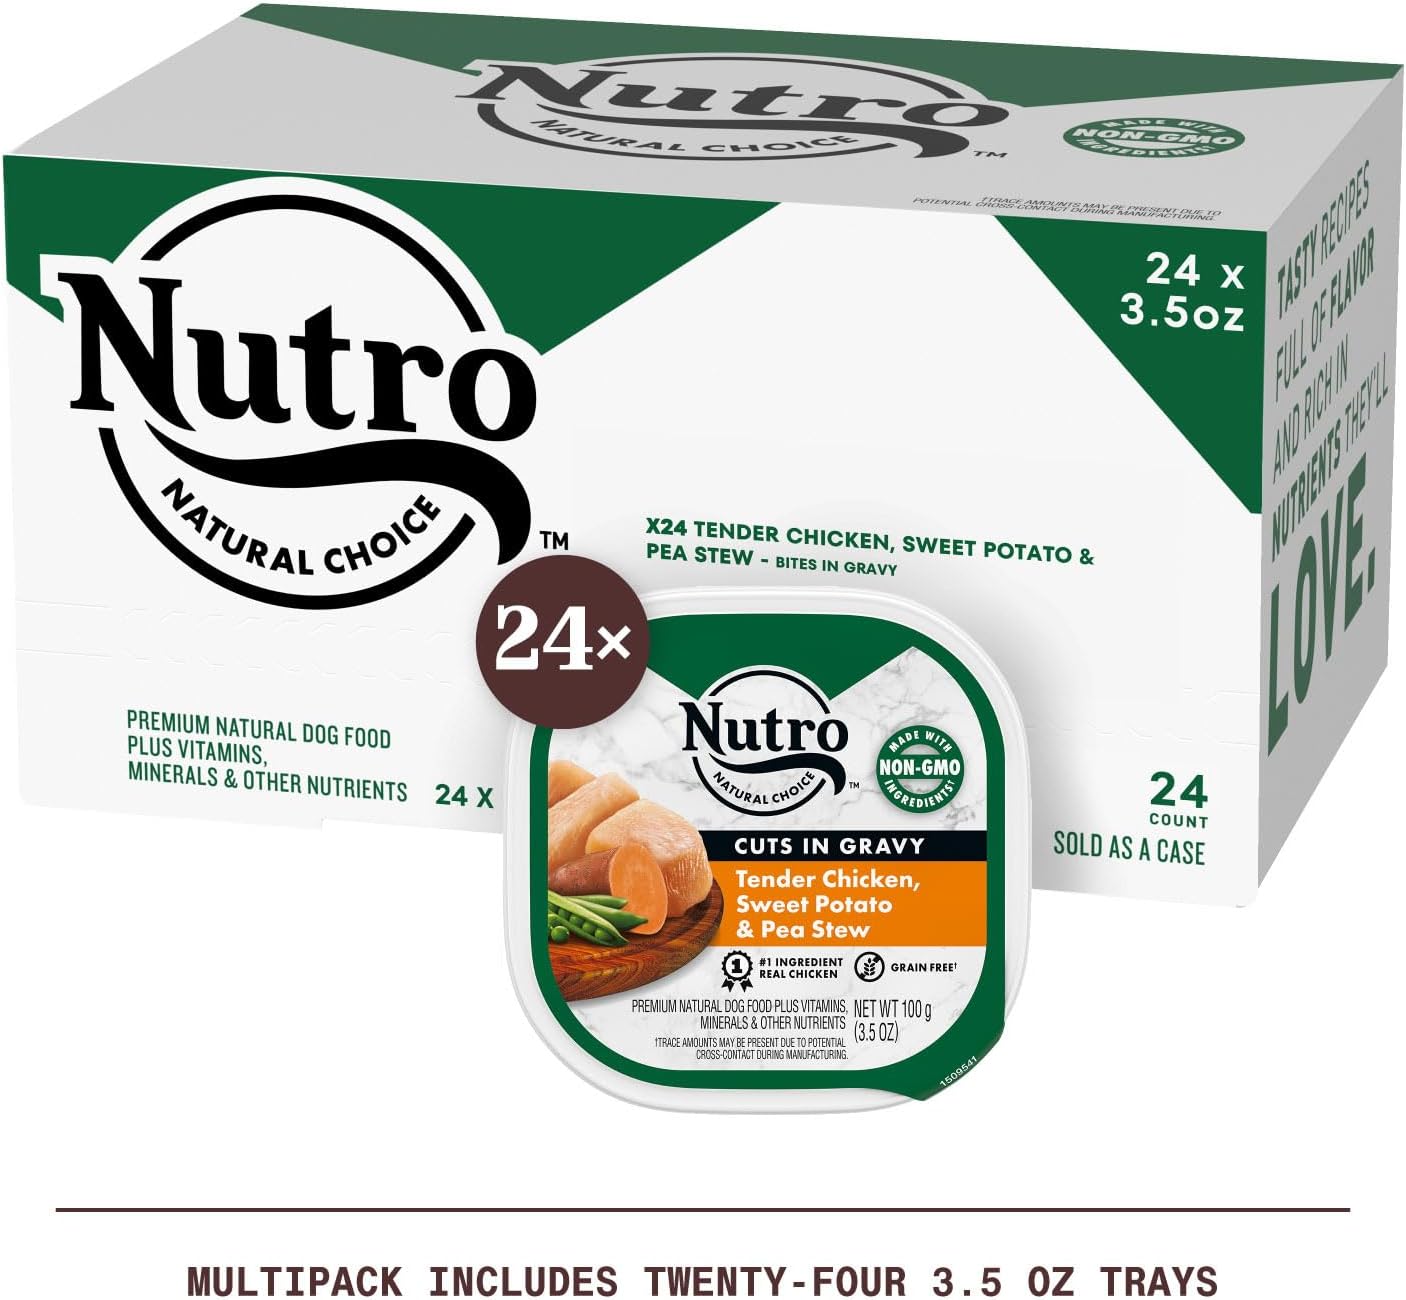 Select Amazon Accounts (YMMV): 24-Count 3.5-Oz NUTRO Adult Natural Grain-Free Wet Dog Food (Tender Chicken, Sweet Potato & Pea Stew) $21.85 & More w/ S&S + FS